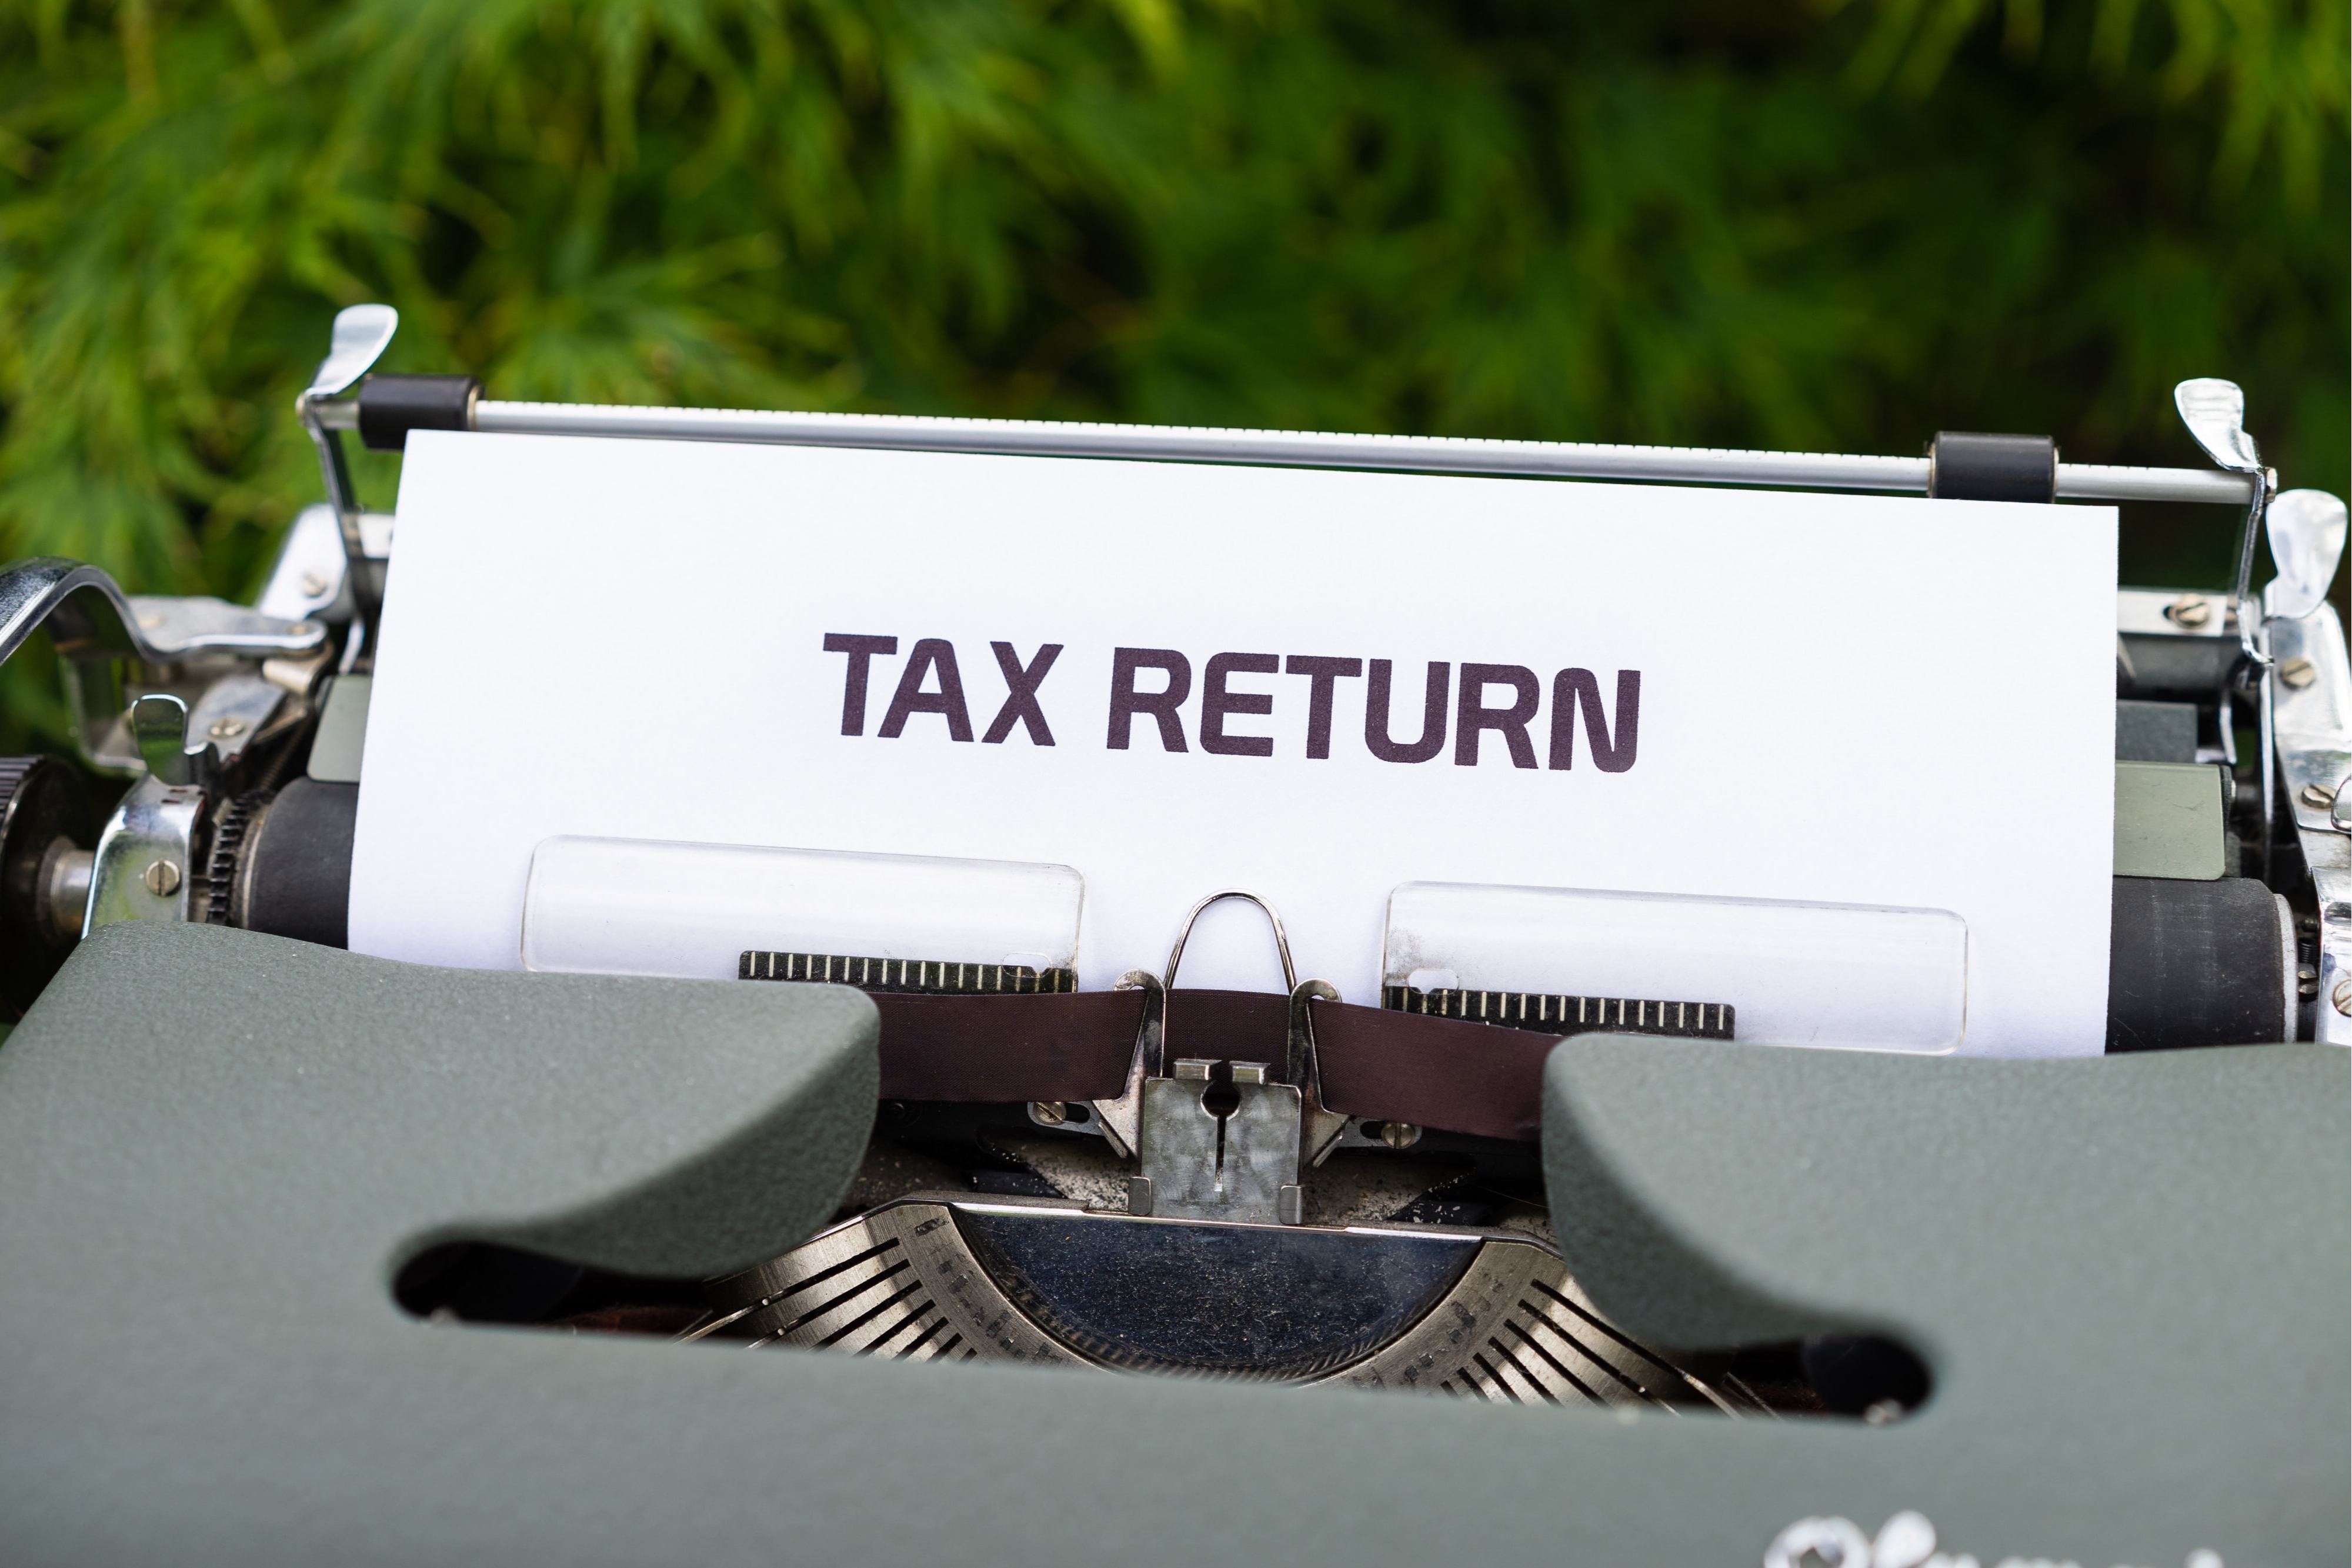 
The May 17th New Tax Deadline: What You Need To Know